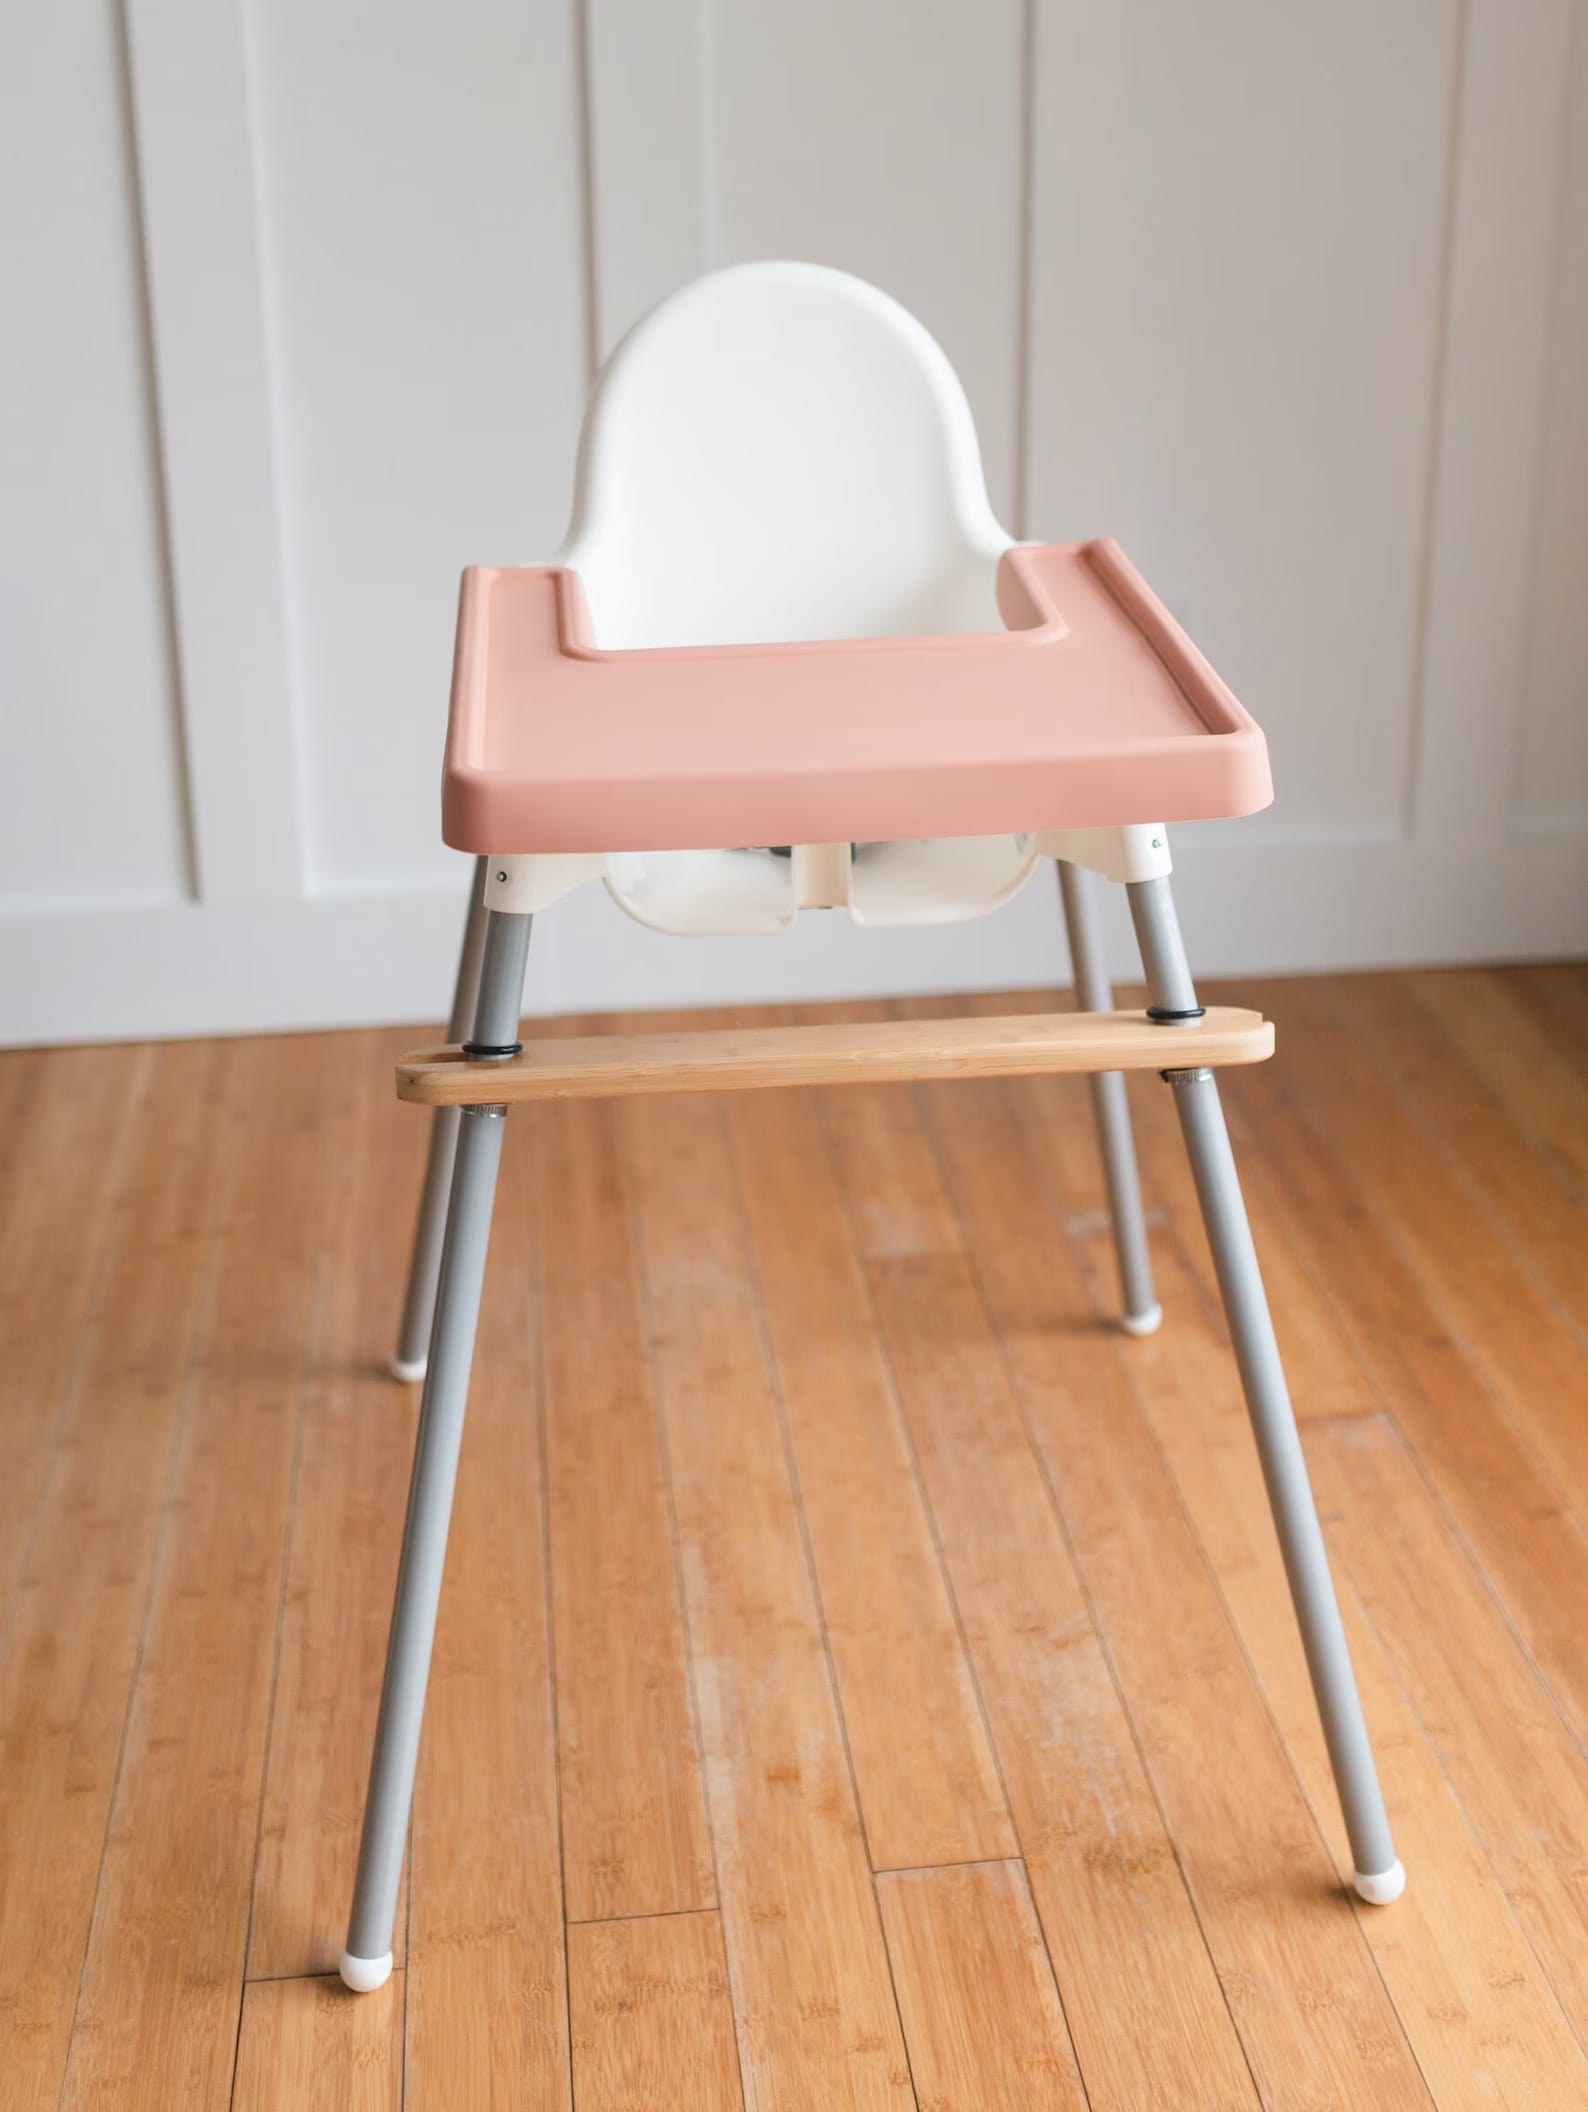 https://cdn.apartmenttherapy.info/image/upload/v1676561749/gen-workflow/product-database/etsy-silicone-tray-cover-high-chair.jpg